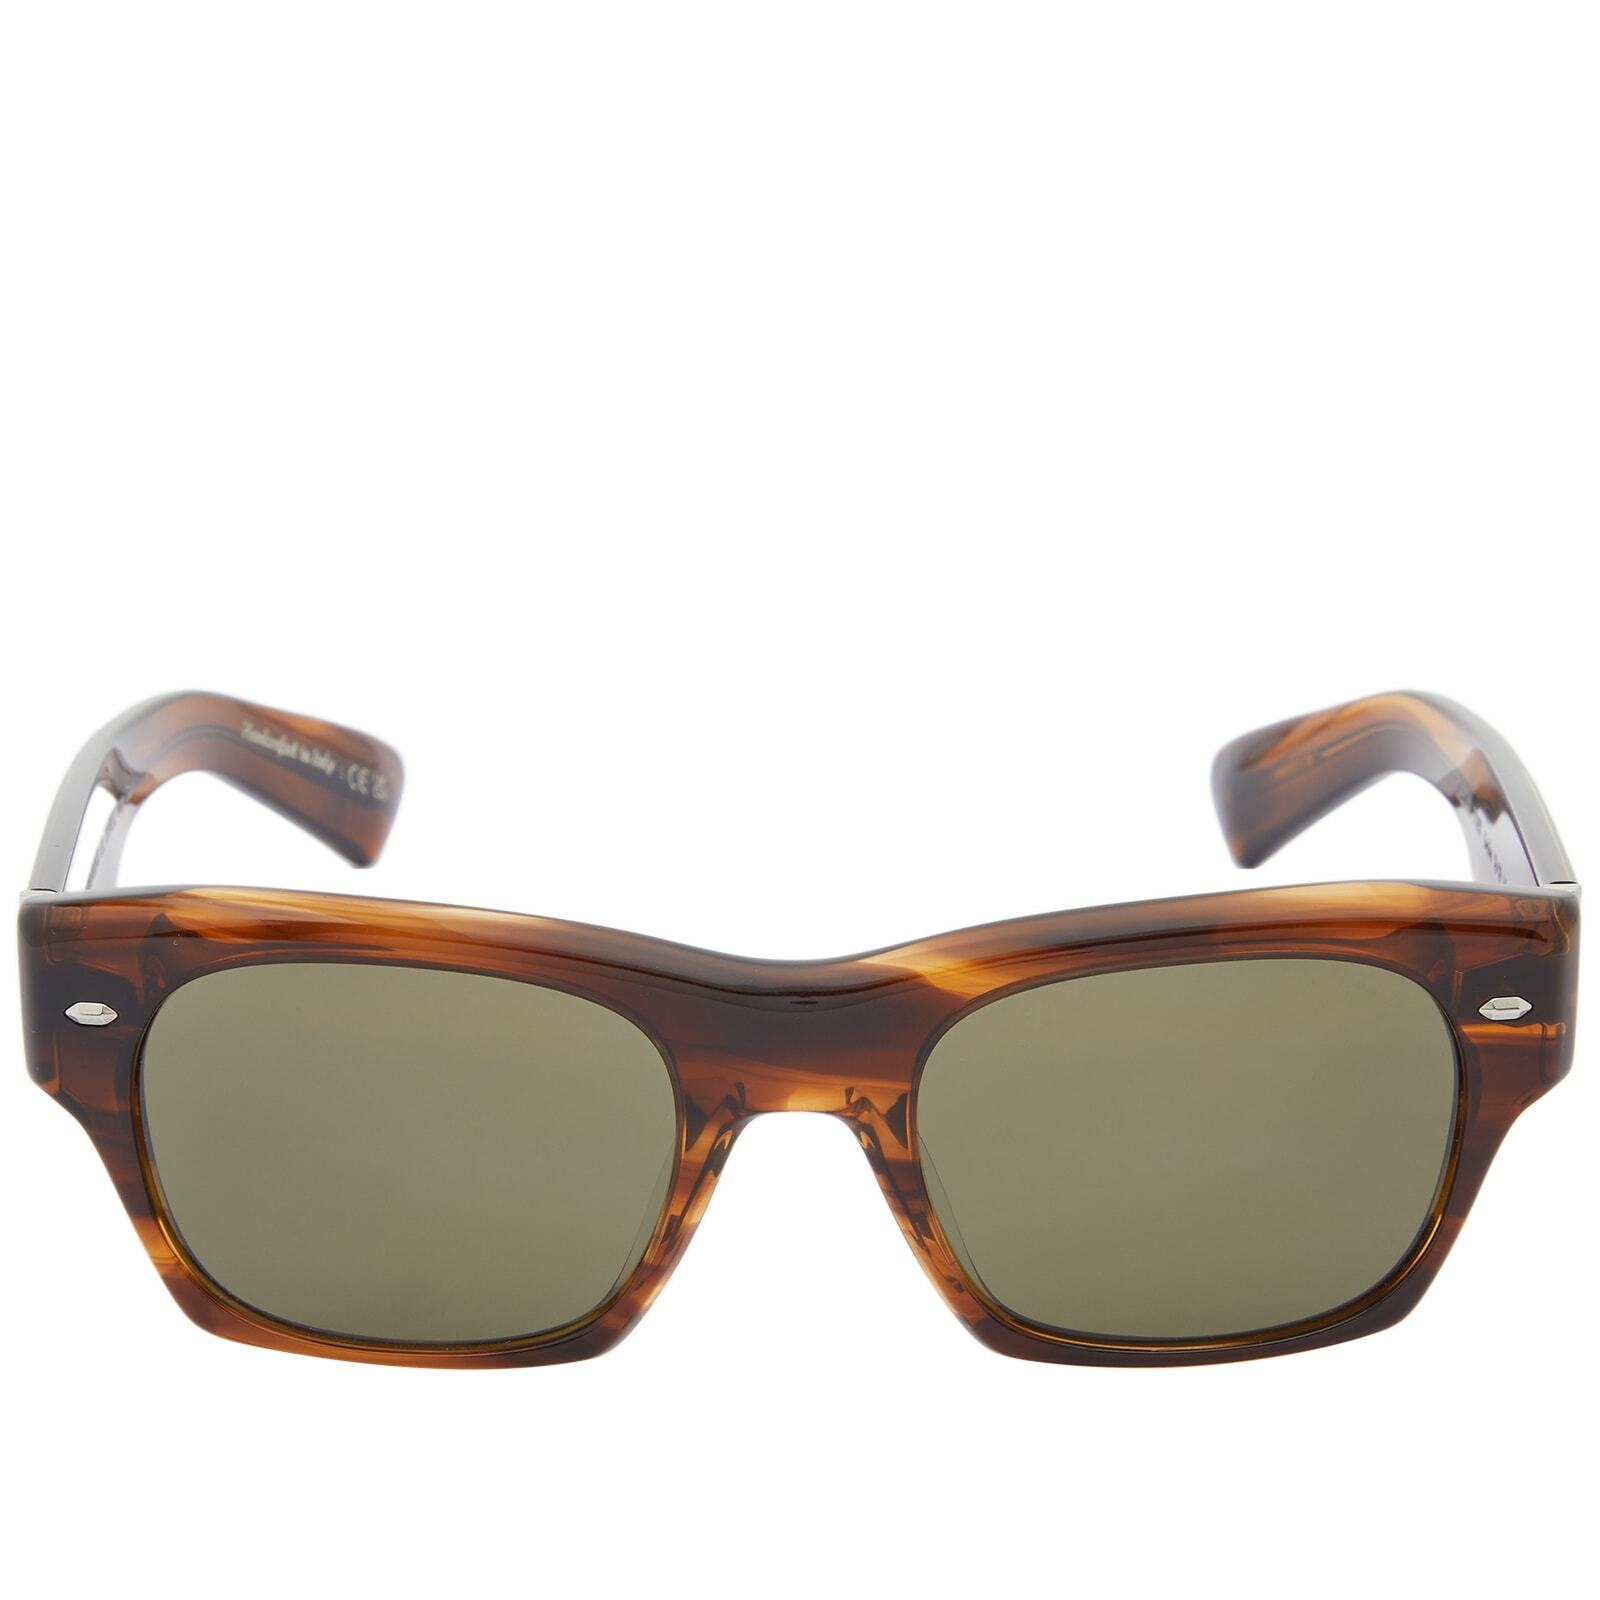 Oliver Peoples Men's 5514SU Sunglasses in Tuscany Tortoise Oliver Peoples